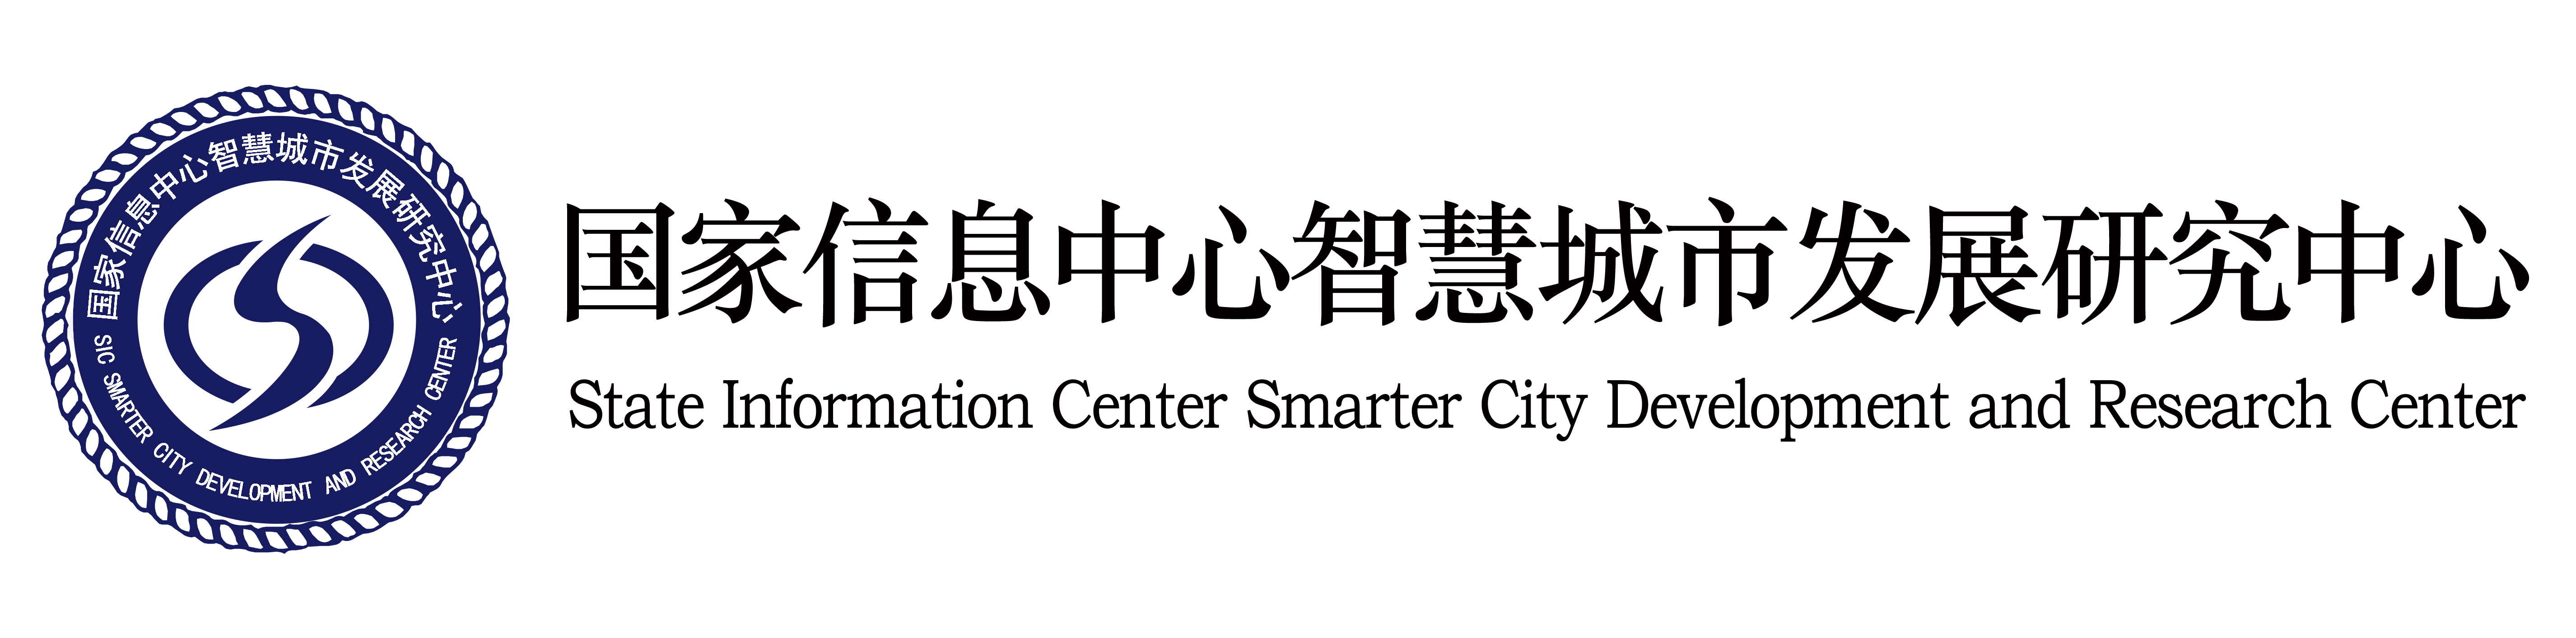 State Information Center Smarter City Development and Research Center